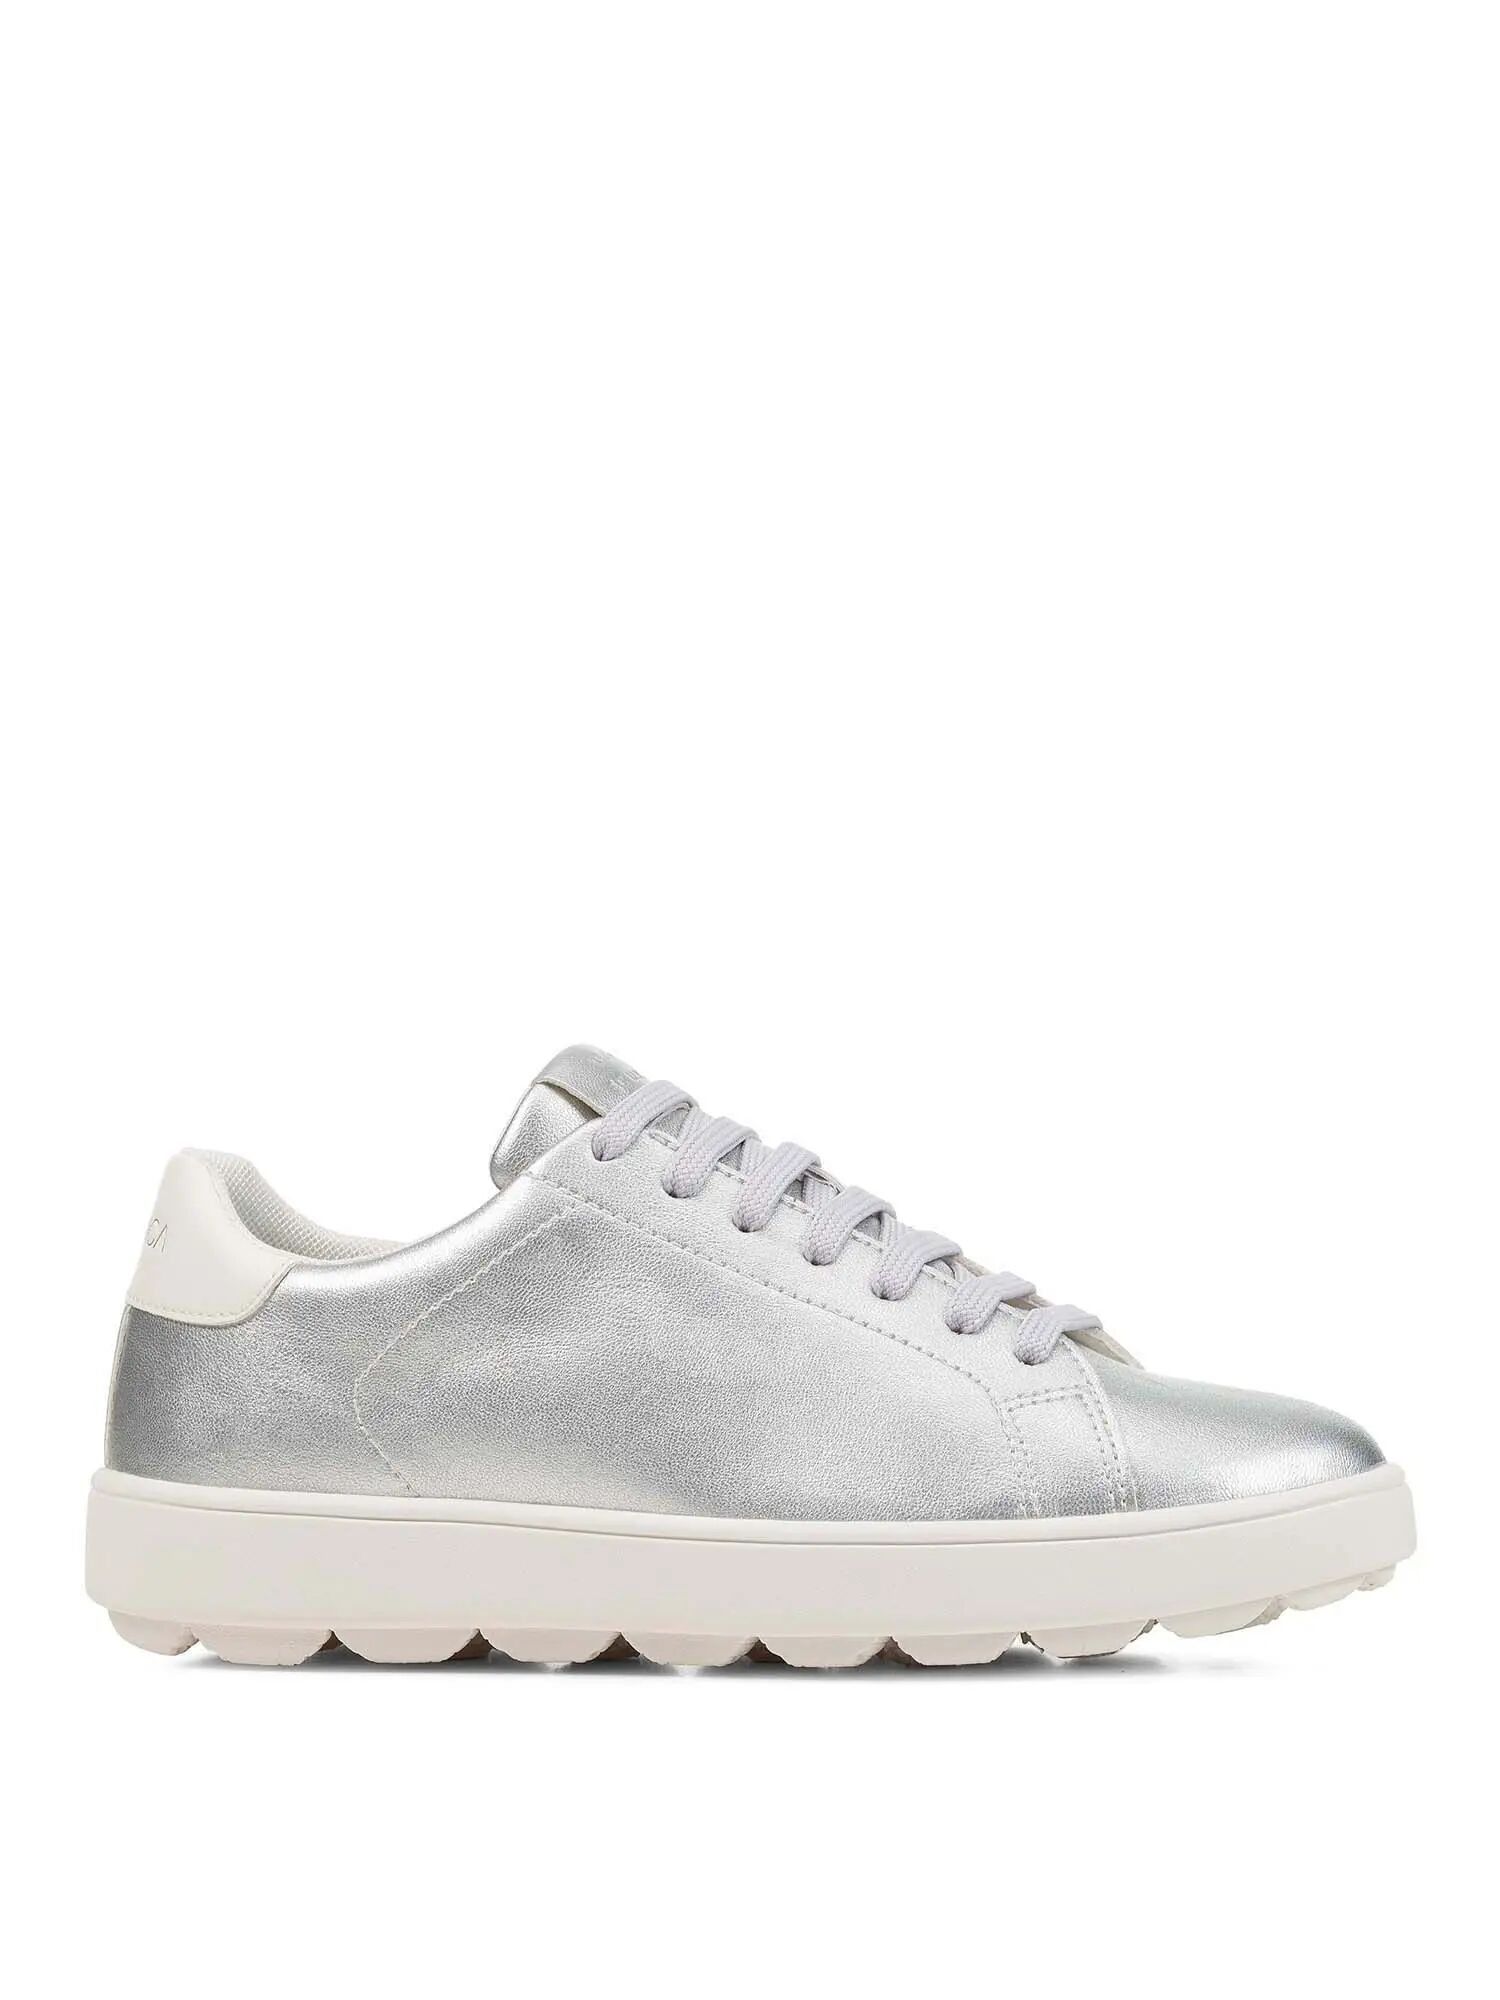 Geox Sneakers Bianche Donna ARGENTO/BIANCO 35